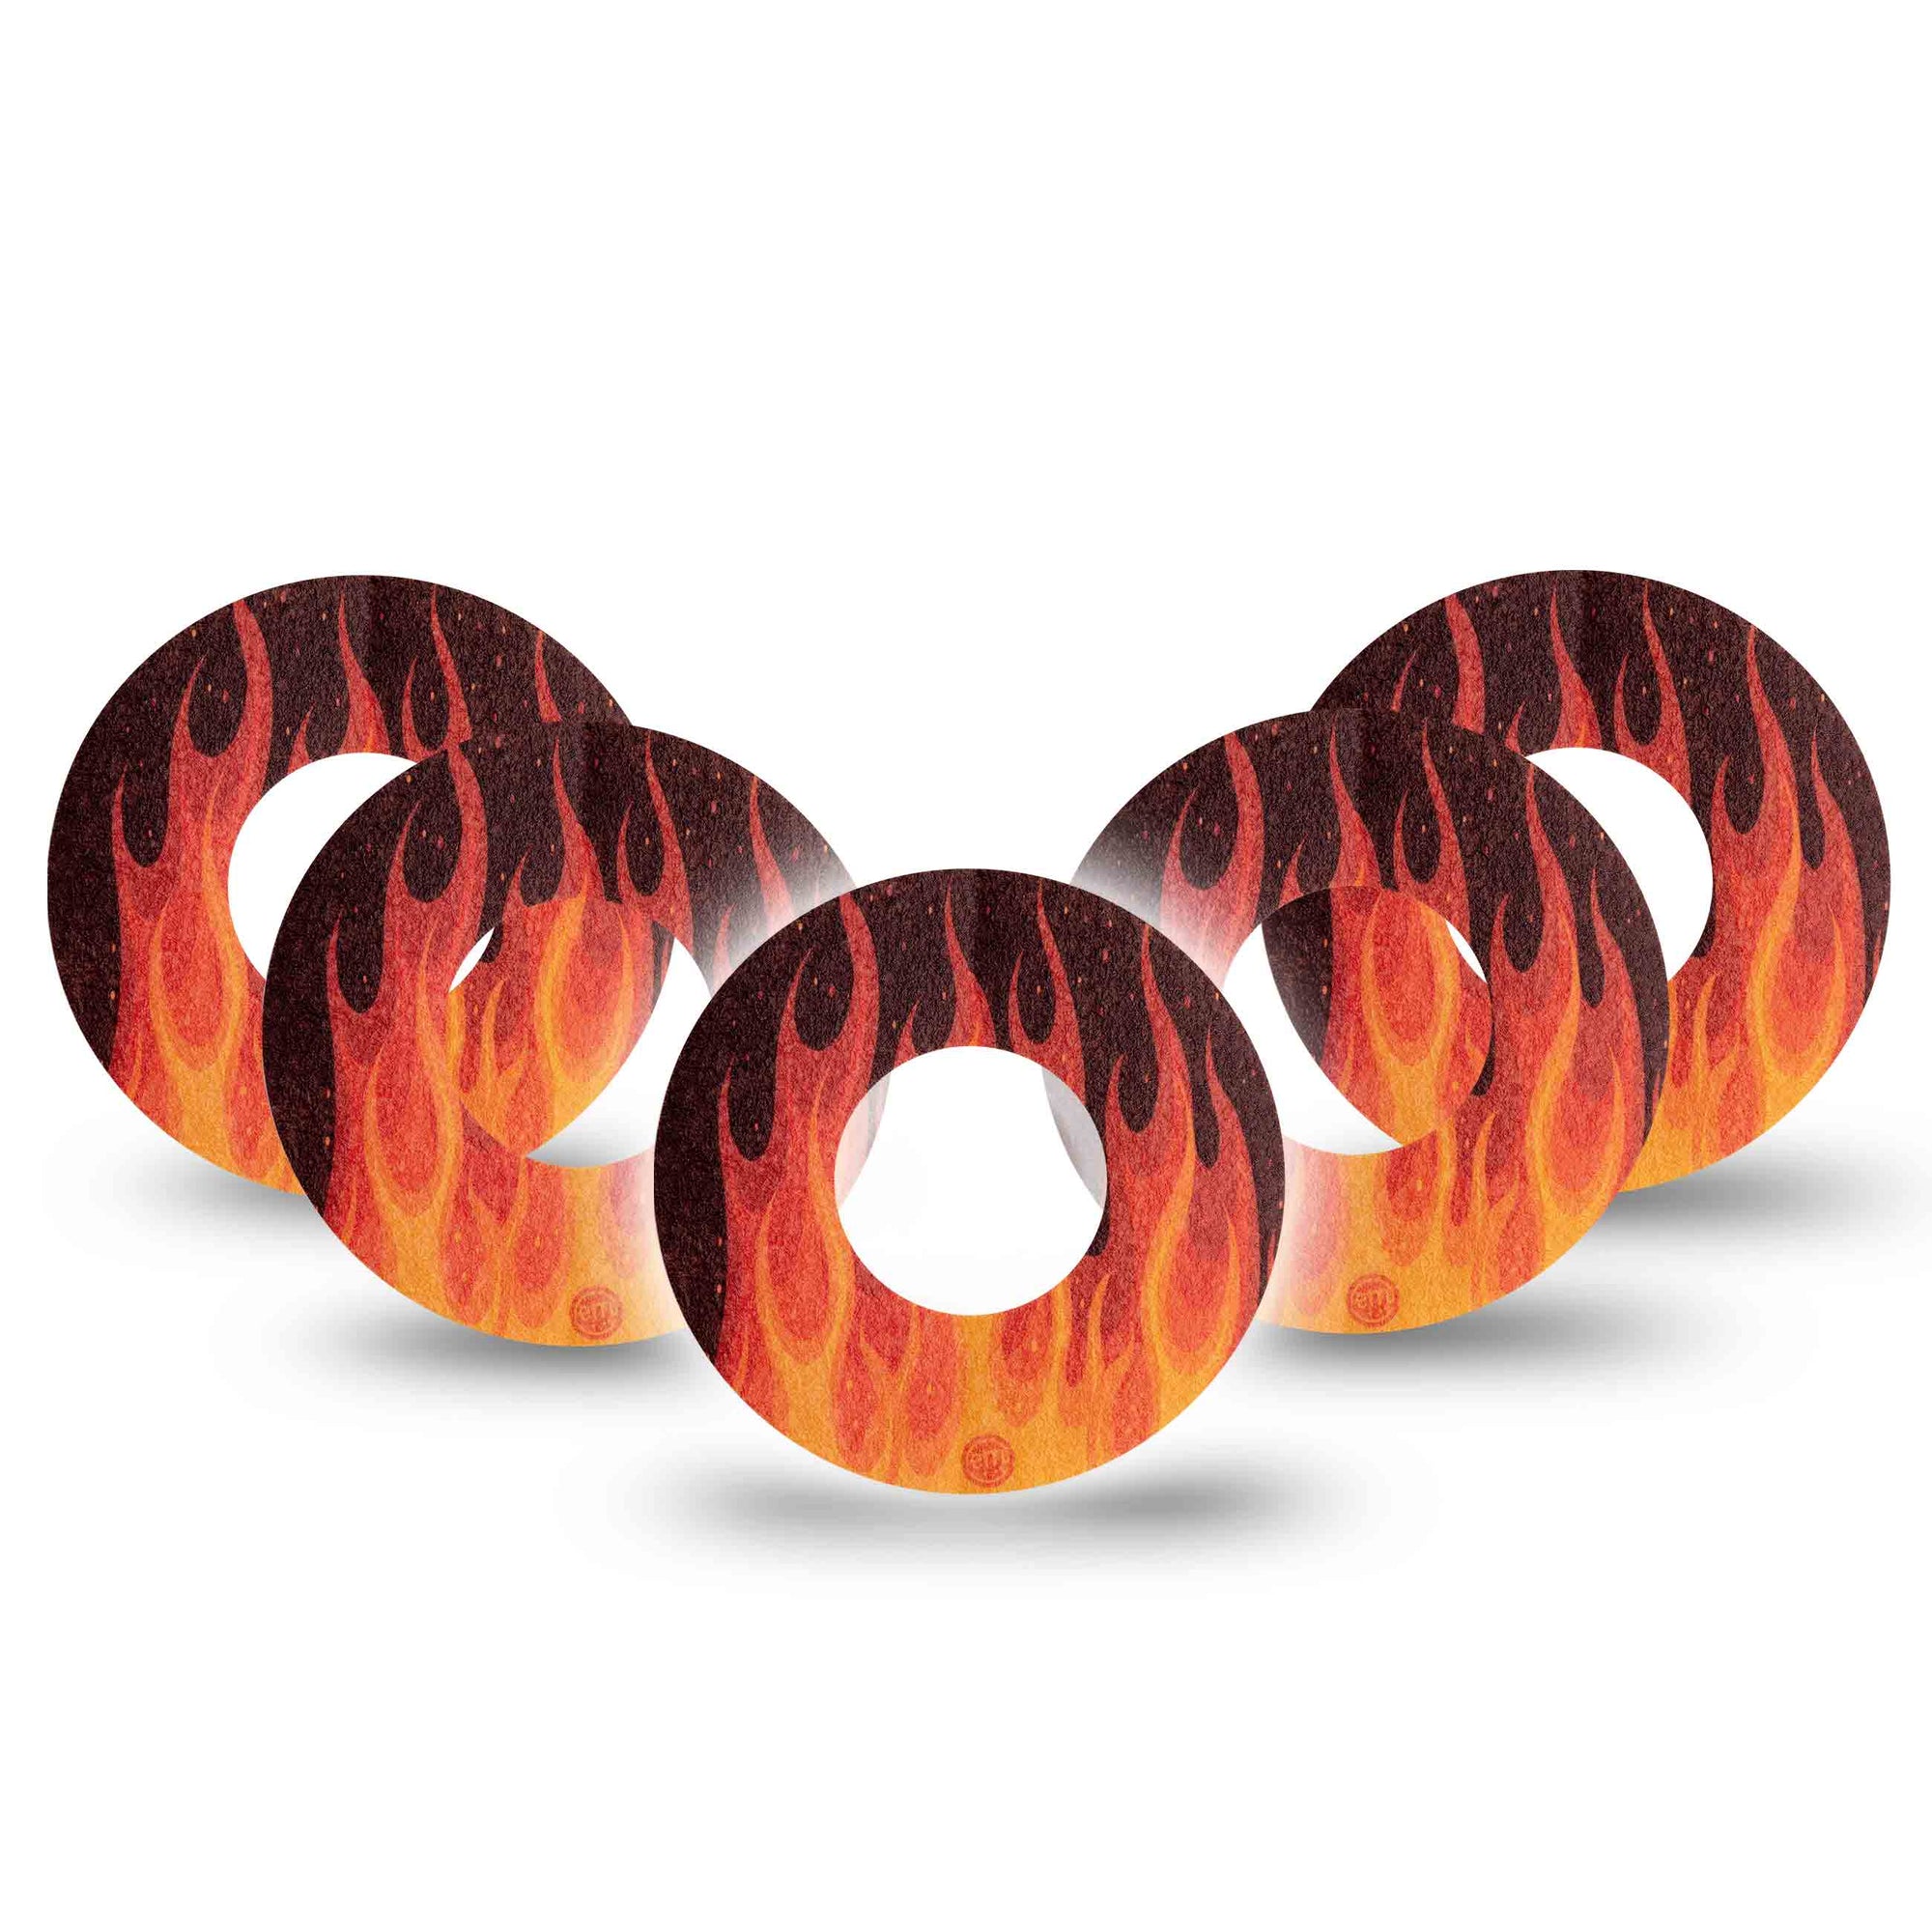 ExpressionMed Flame Libre Tape 5-Pack